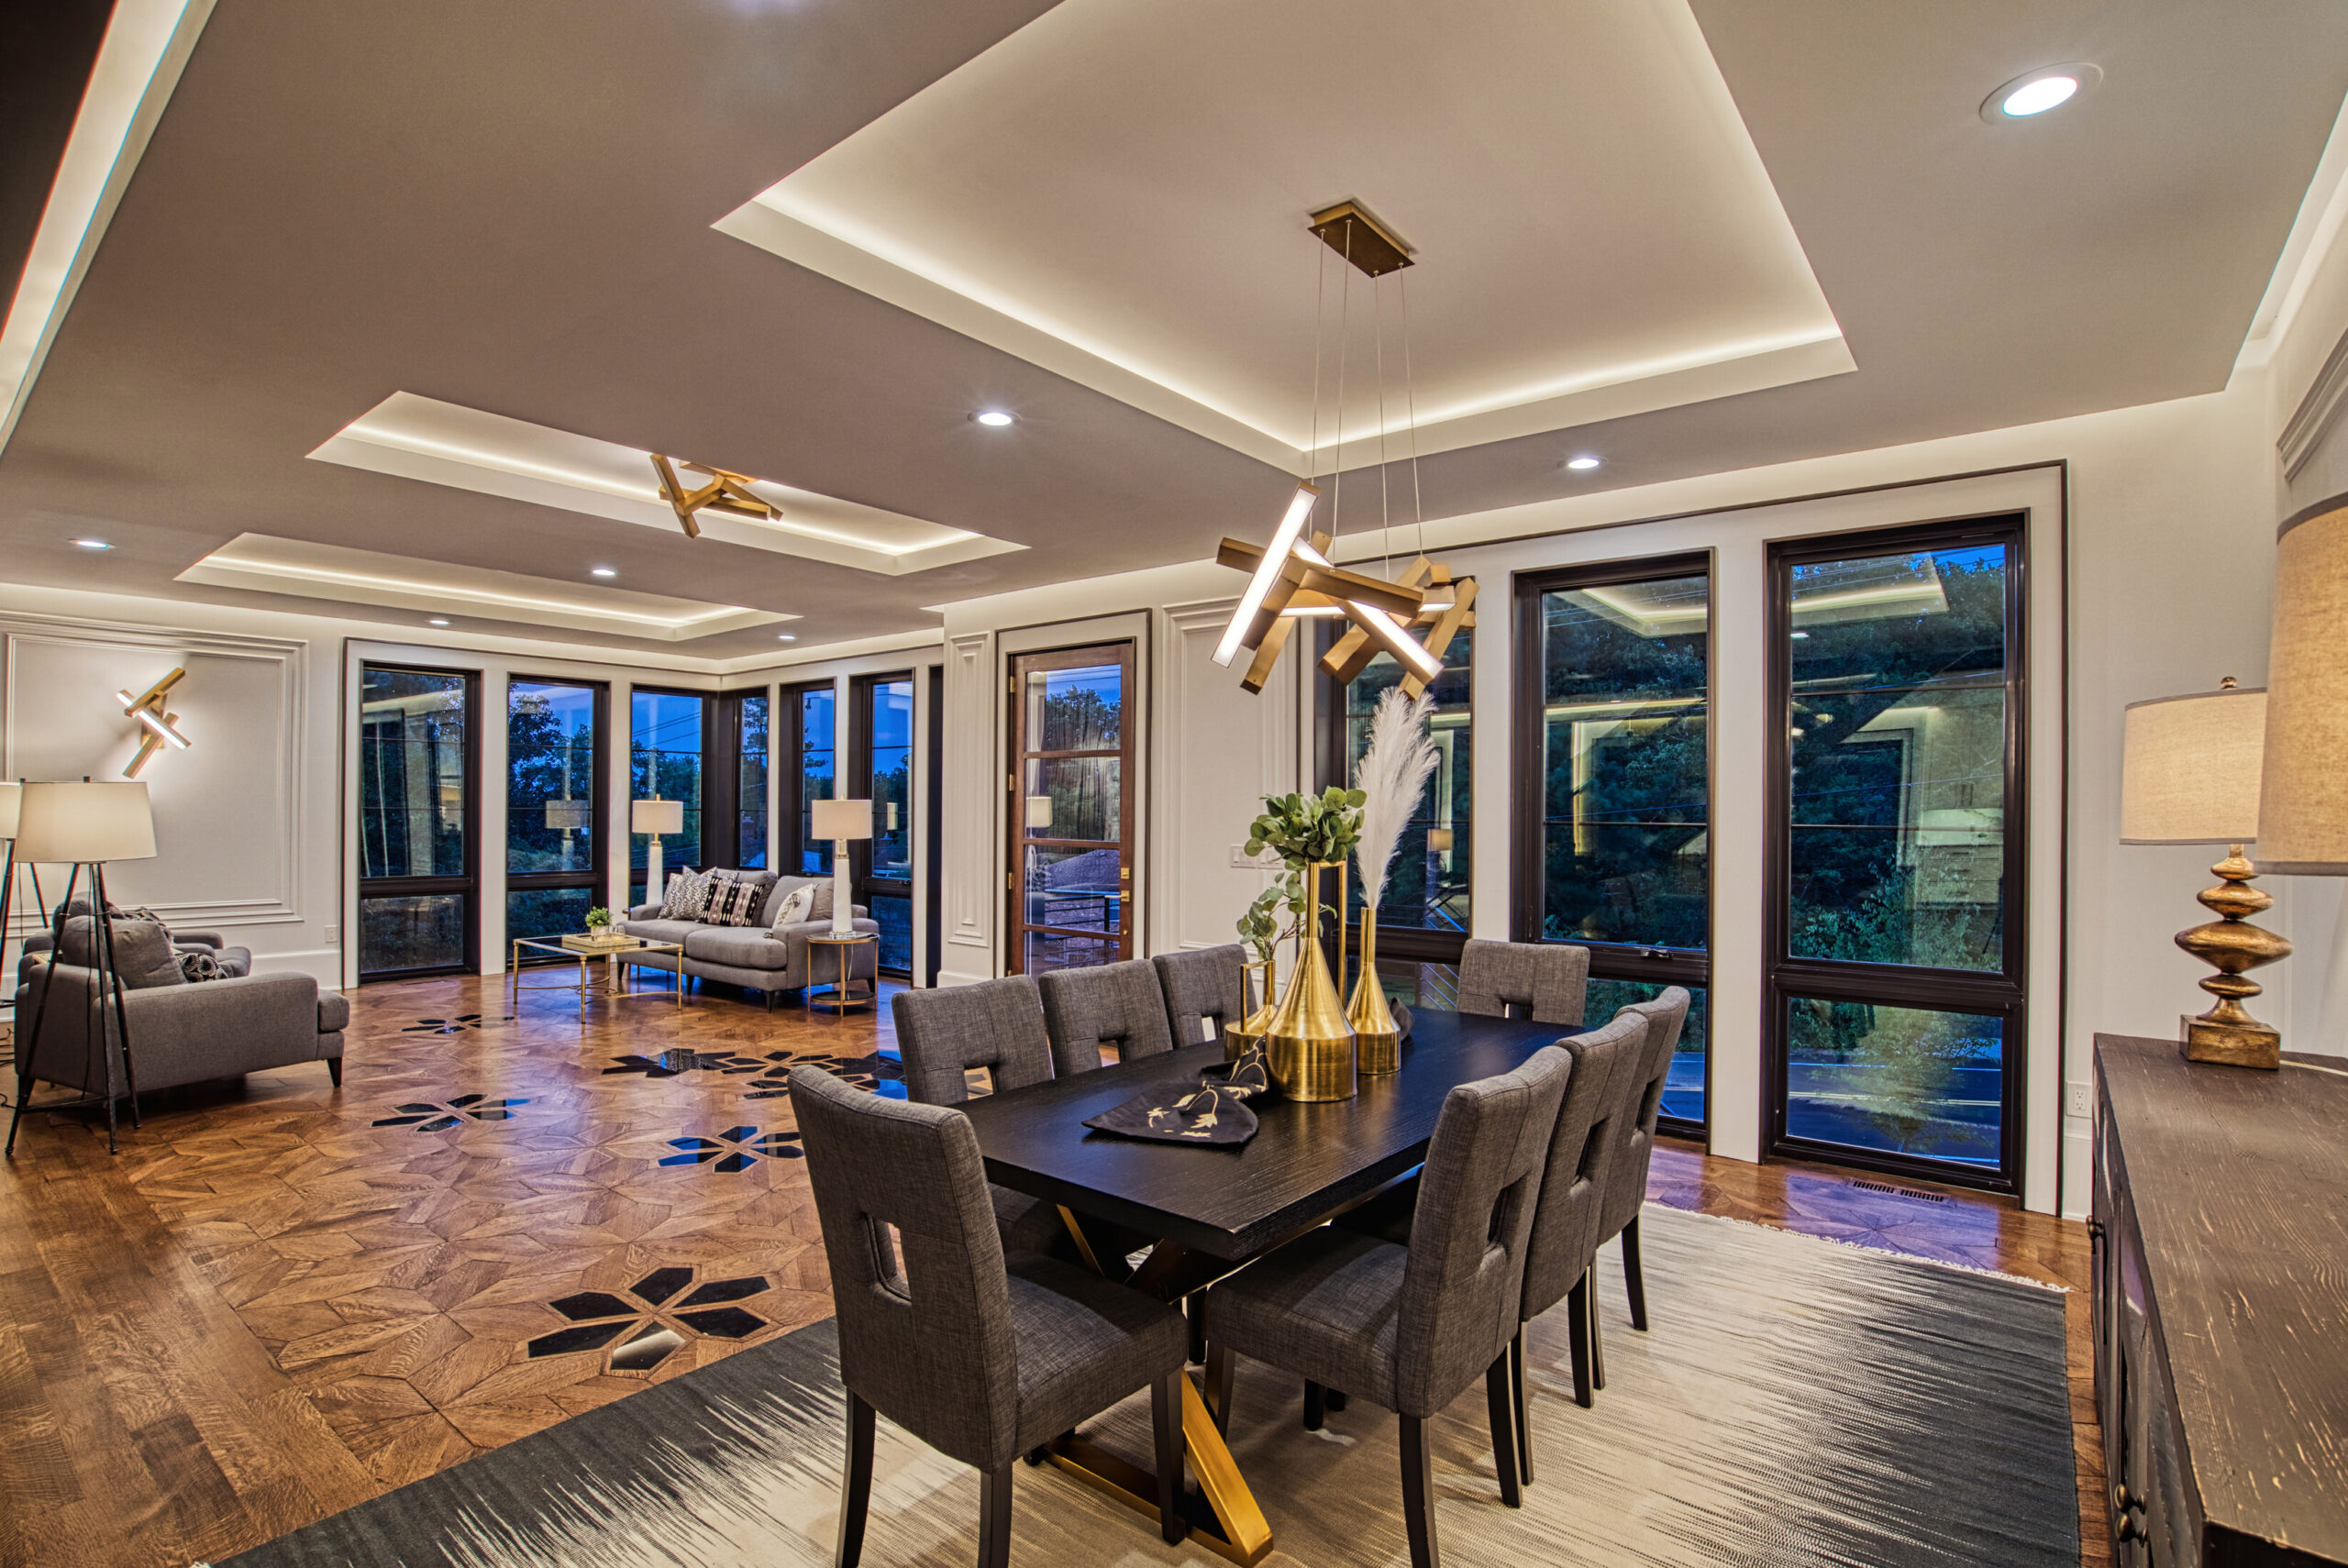 dusk photo of interior of new construction luxury home with open floor plan, dining area in the foreground and sitting area in background, tray ceilings